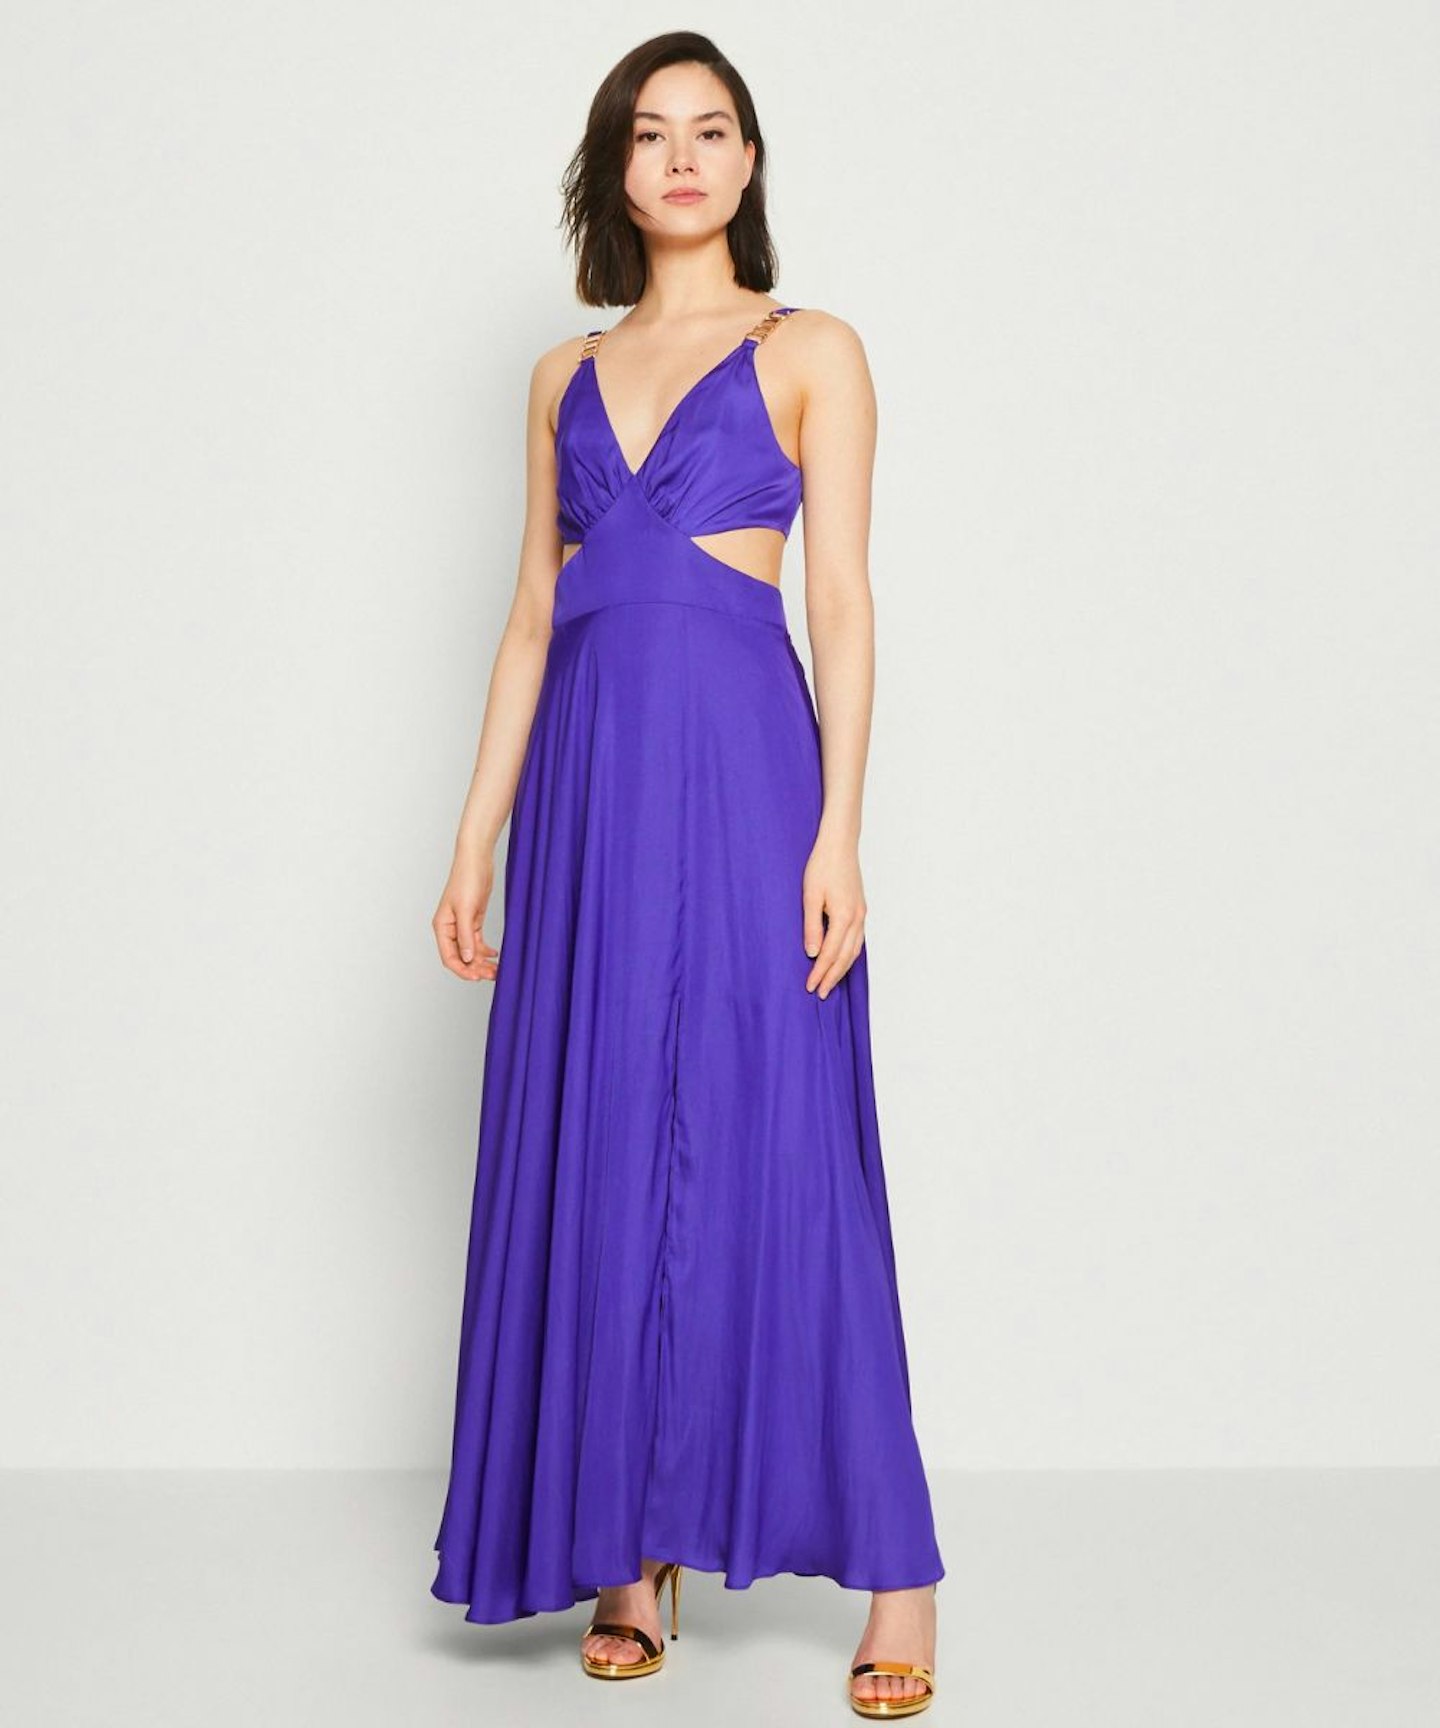 Morgan, Maxi Dress with Embellished Straps